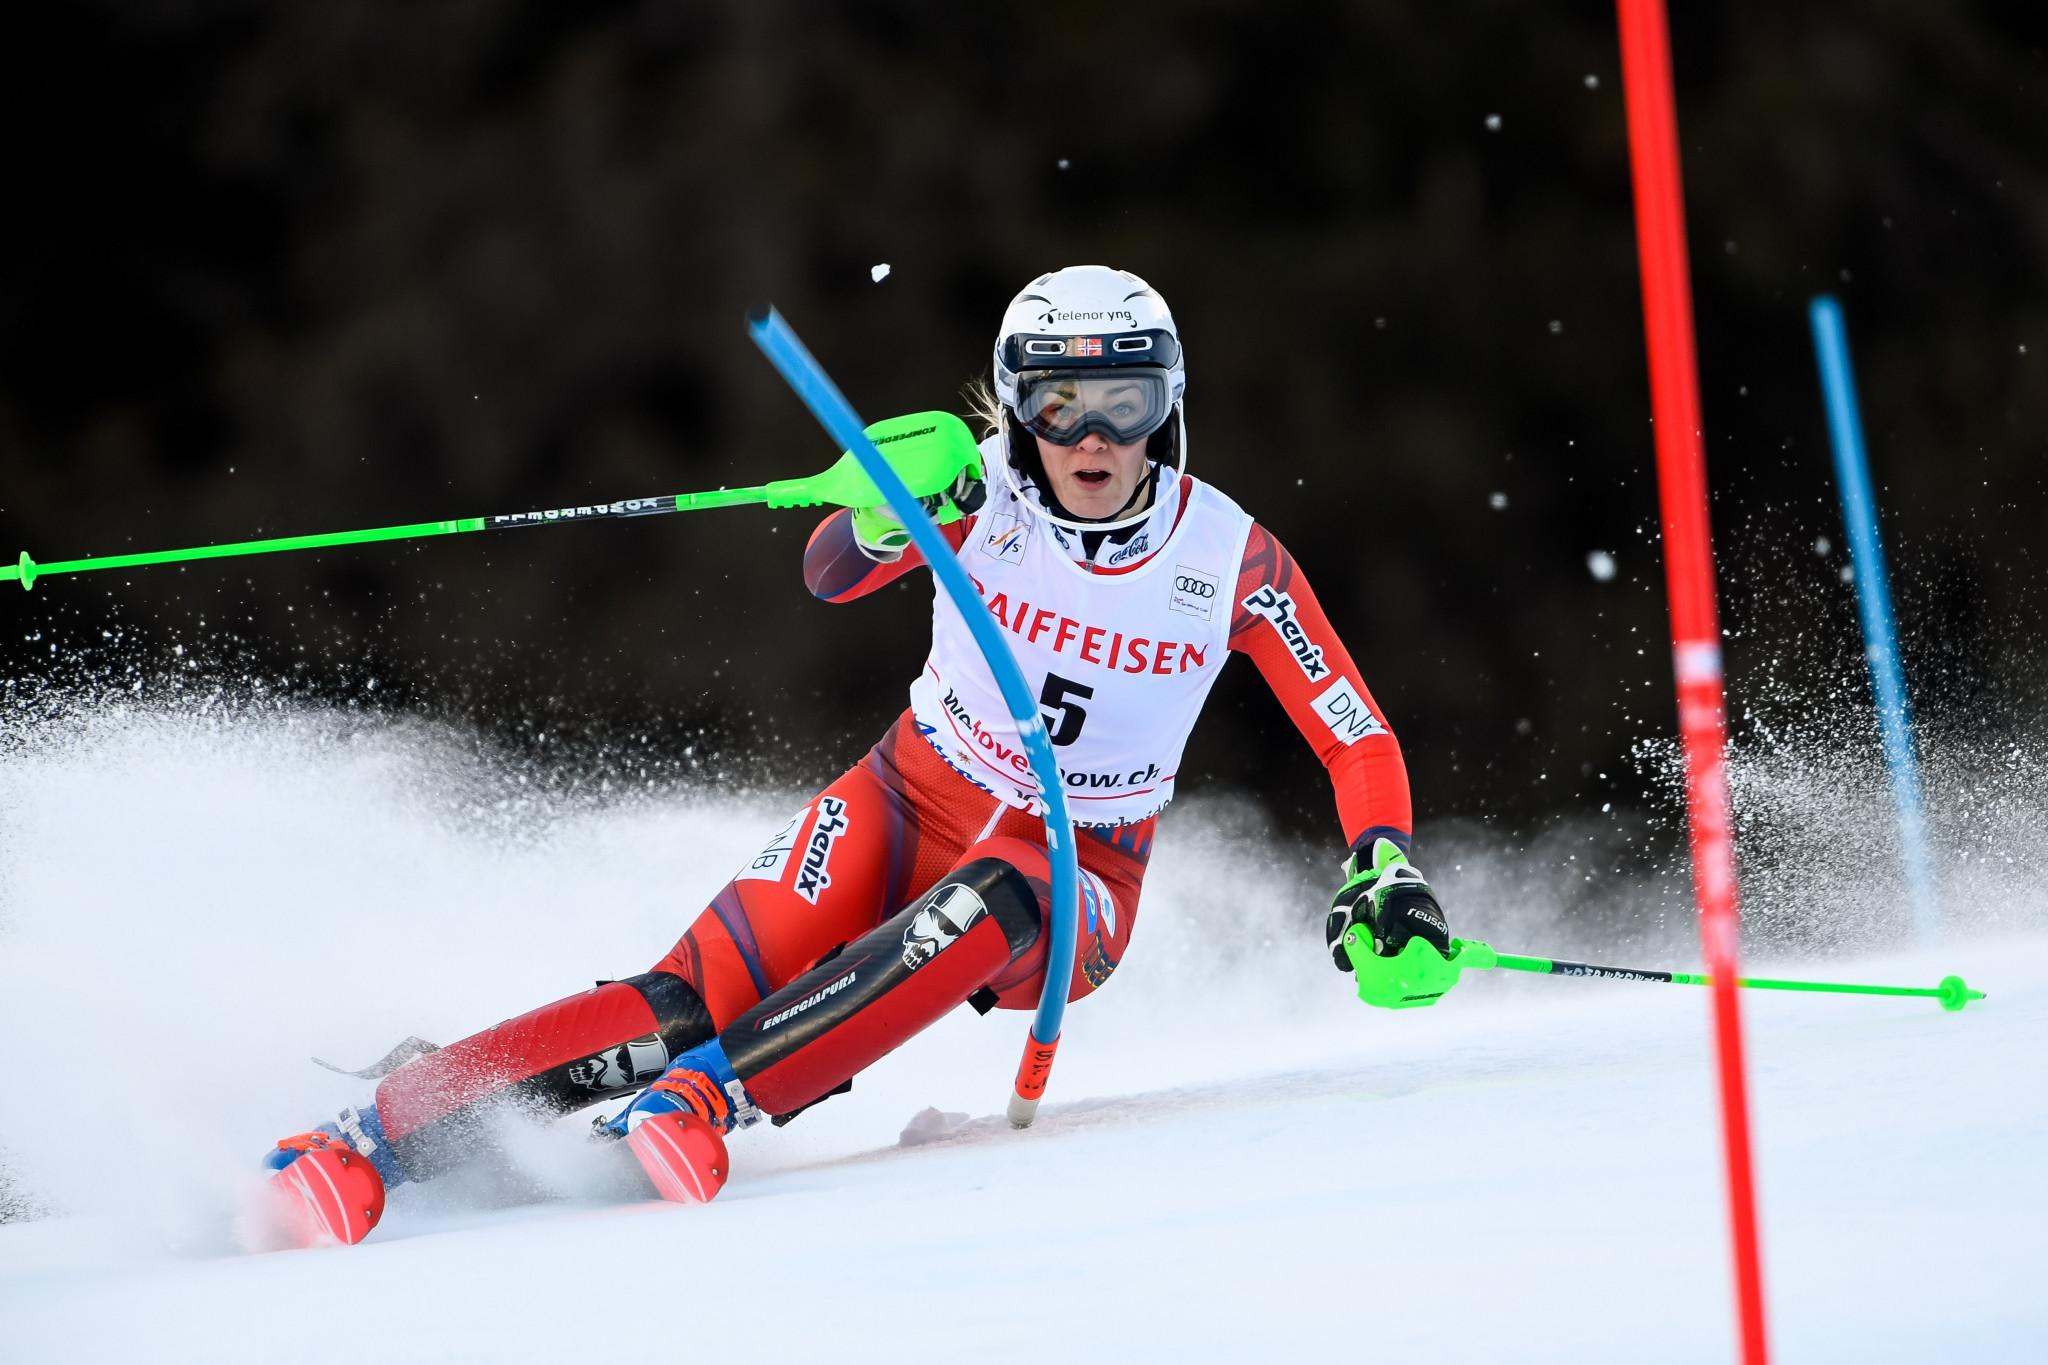 Norway's Nina Haver-Loeseth won the women's parallel slalom city event ©Getty Images